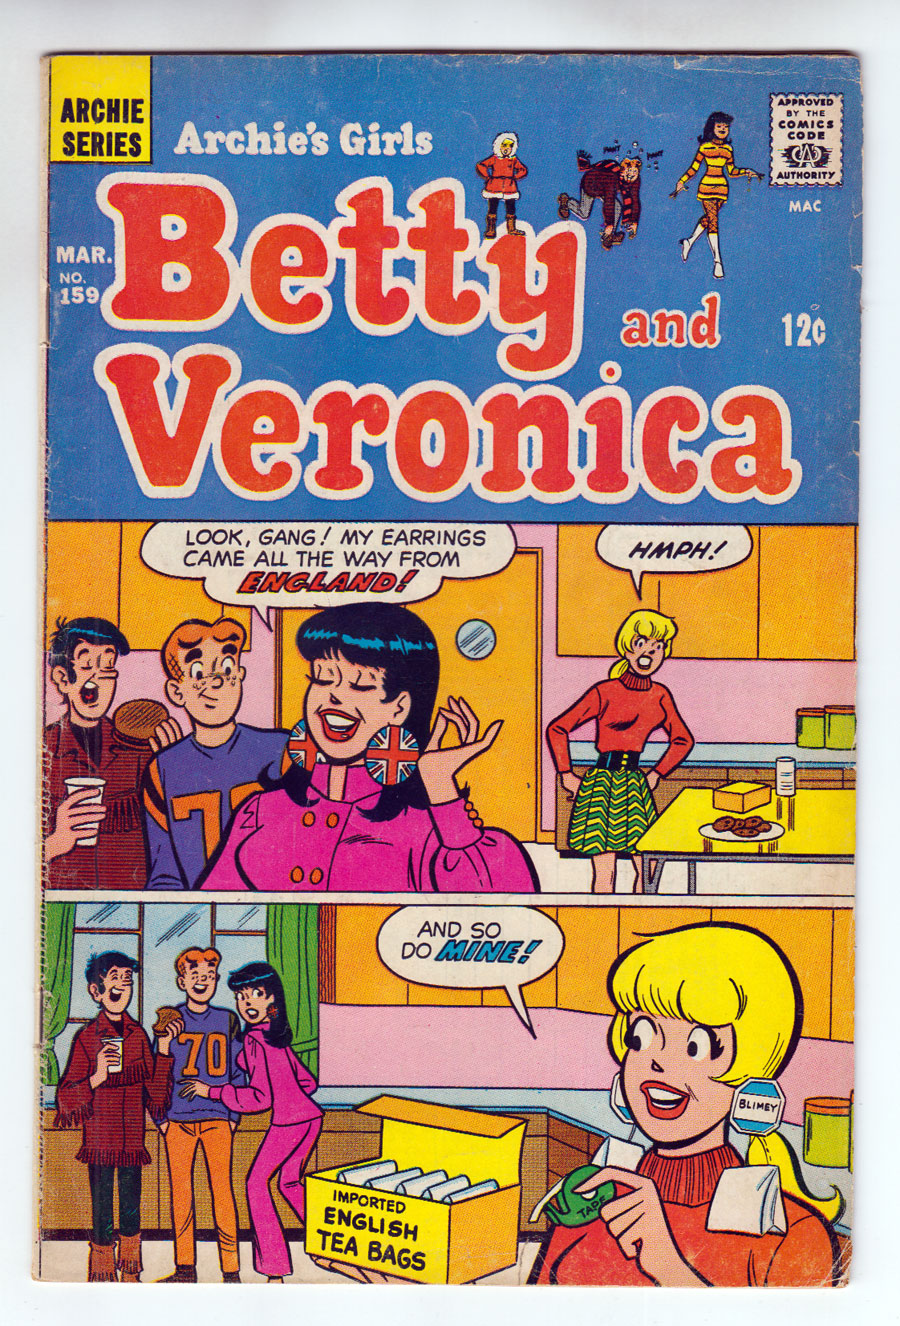 ComicConnect - ARCHIES GIRLS BETTY AND VERONICA ANNUAL 